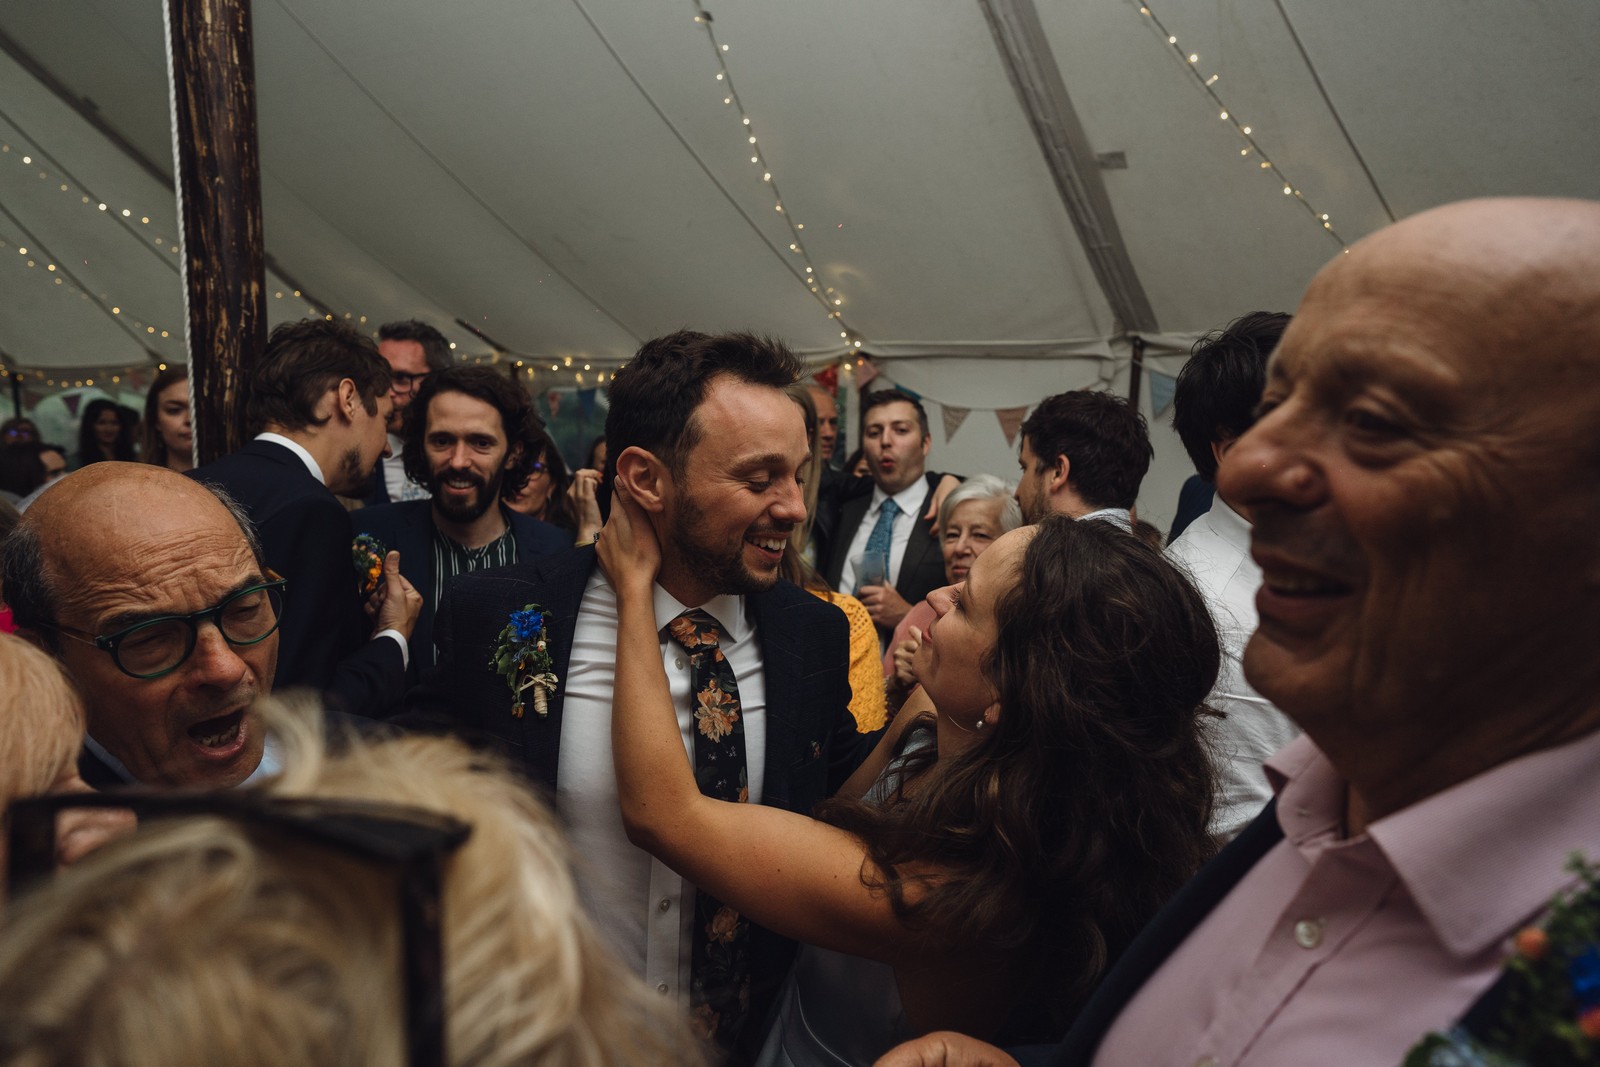 Marquee at home // Phoebe & Mark